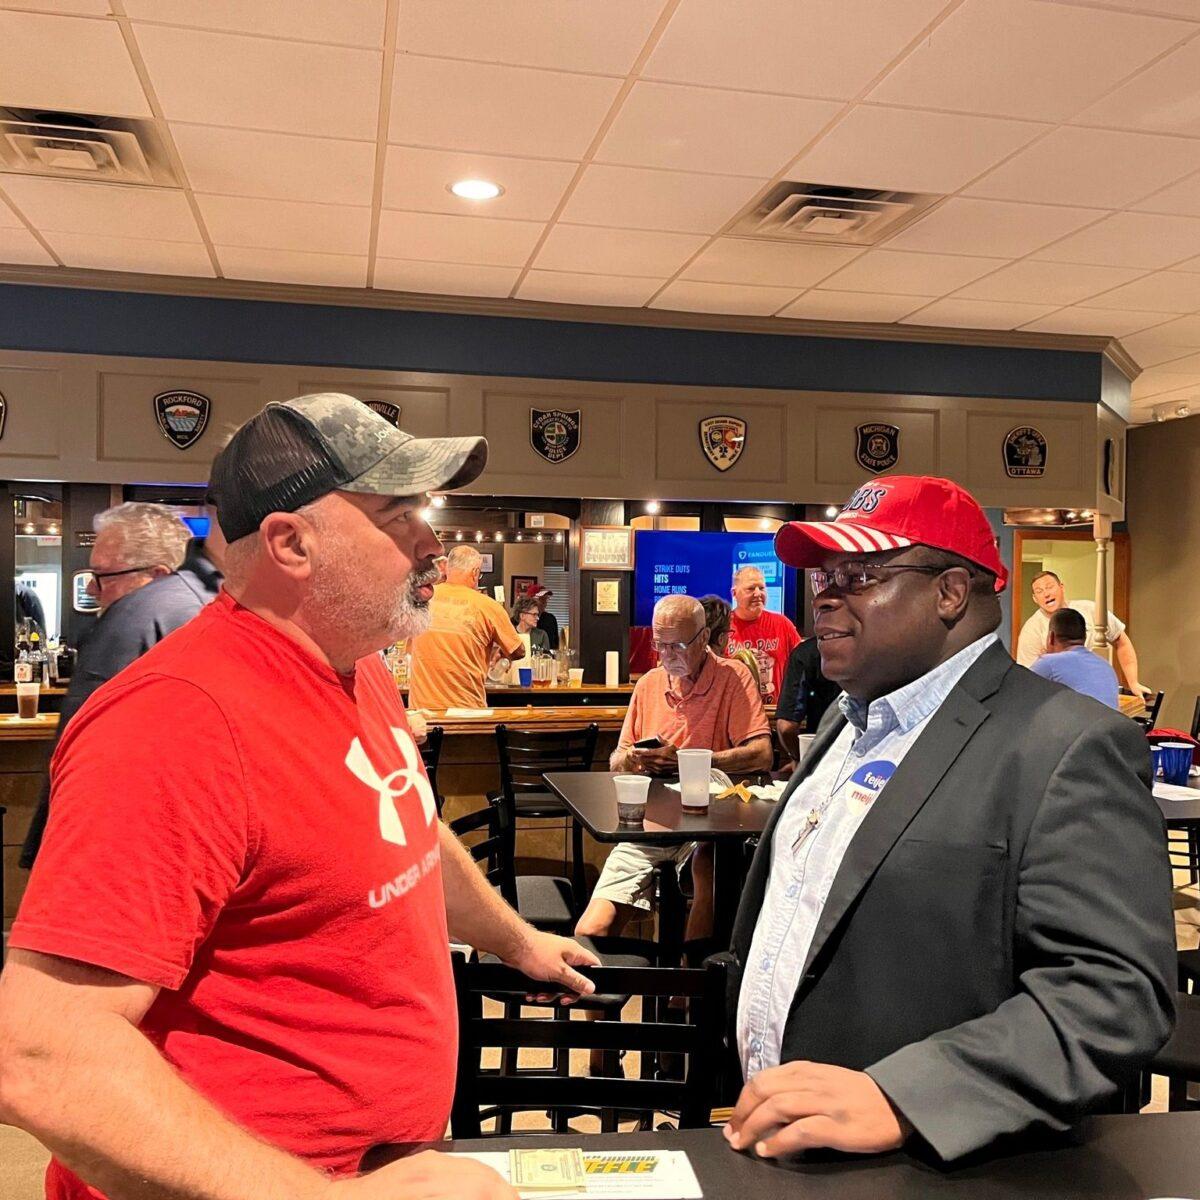 John Gibbs (R) is trying to unseat Republican Rep. Peter Meijer in Michigan's 3rd Congressional District Republican primary on August 2. (Courtesy of John Gibbs for MI-3)